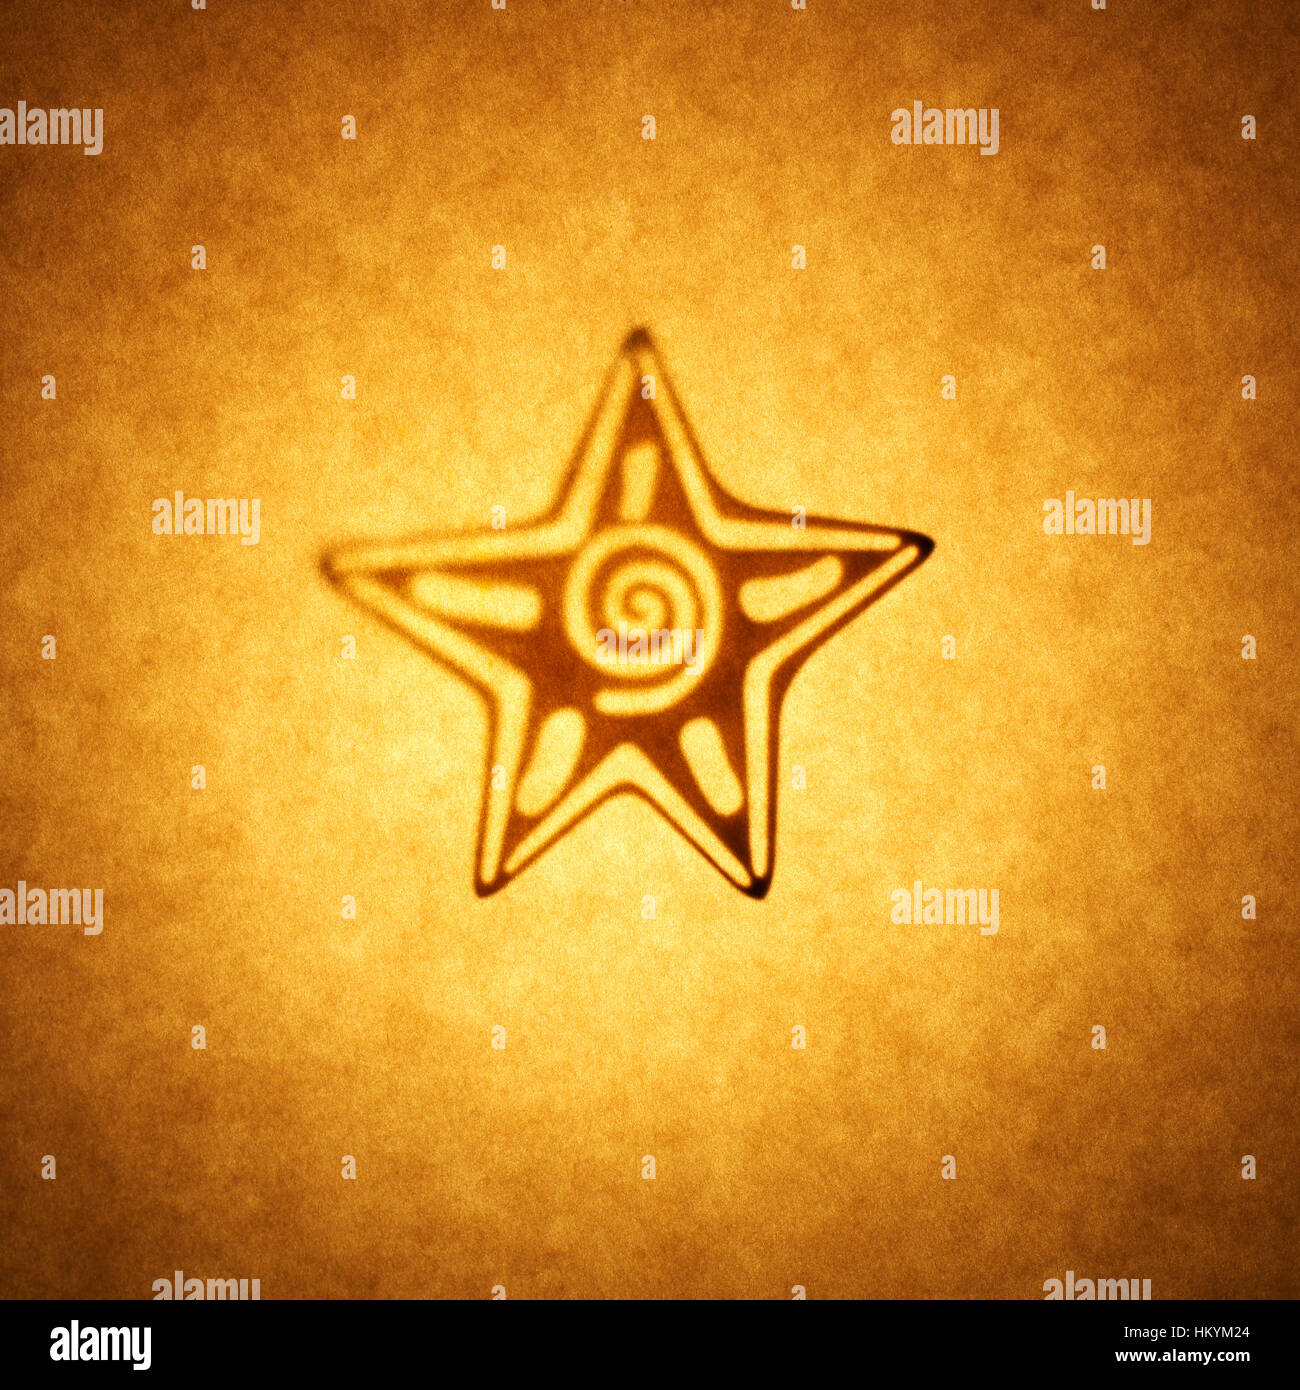 Backlit silhouette of 5 point star shape cut out against brown tone paper, with spot highlight. Stock Photo